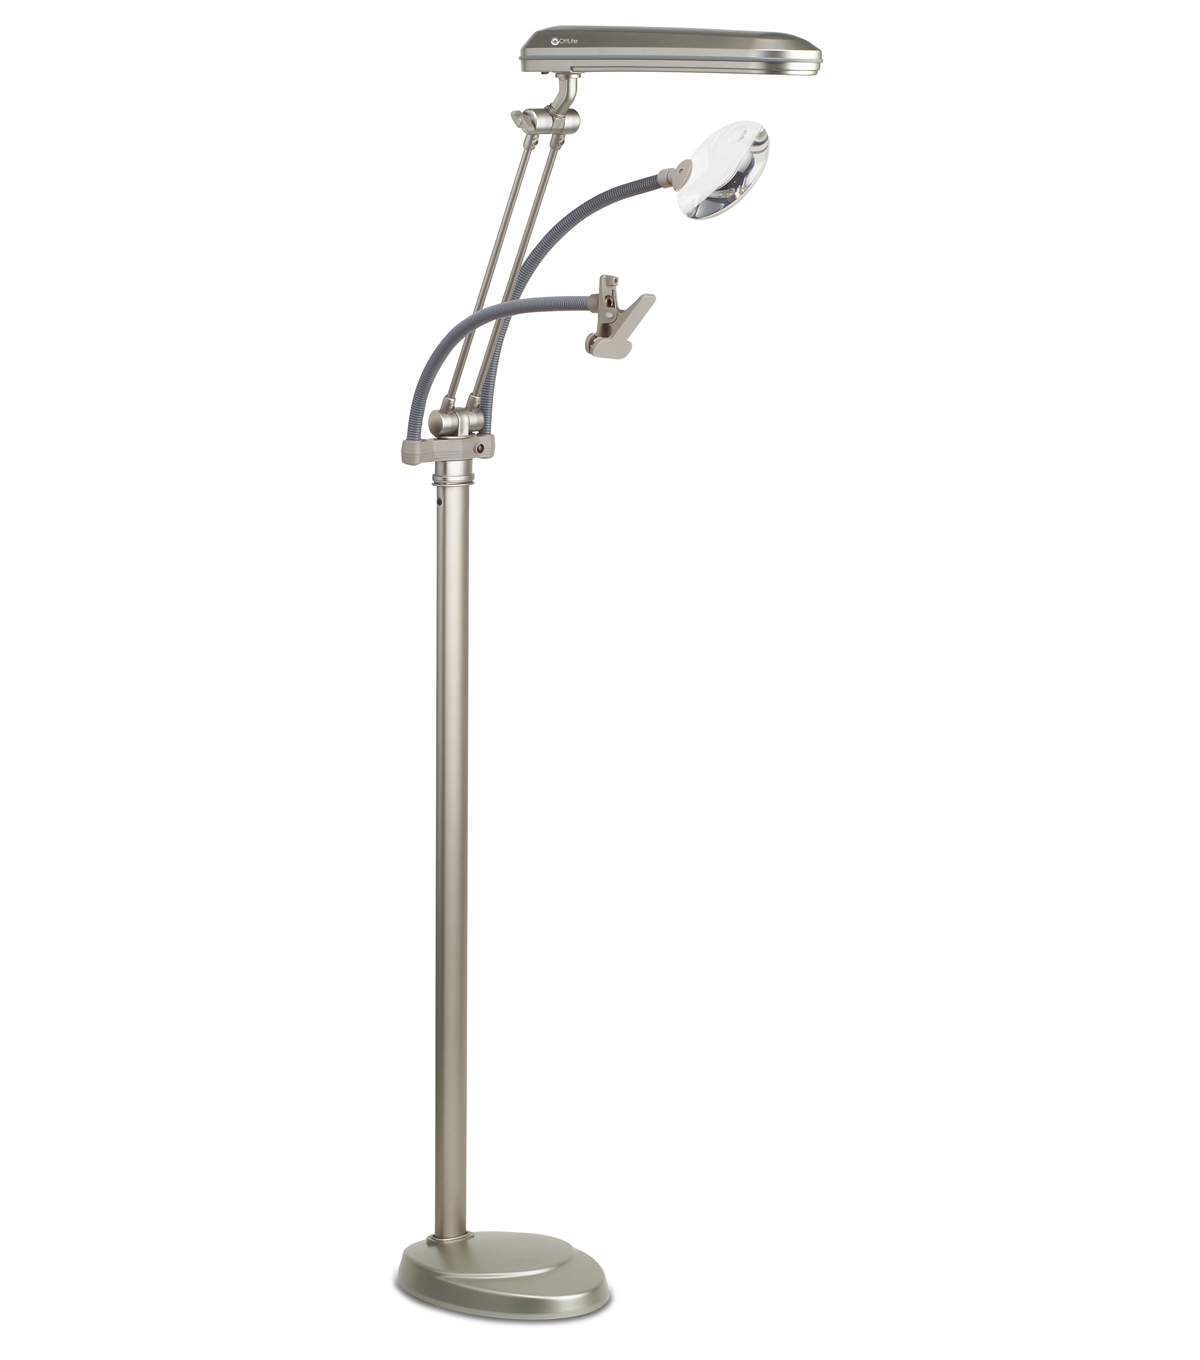 Ottlite 24w 3 In 1 Craft Floor Lamp throughout proportions 1200 X 1360